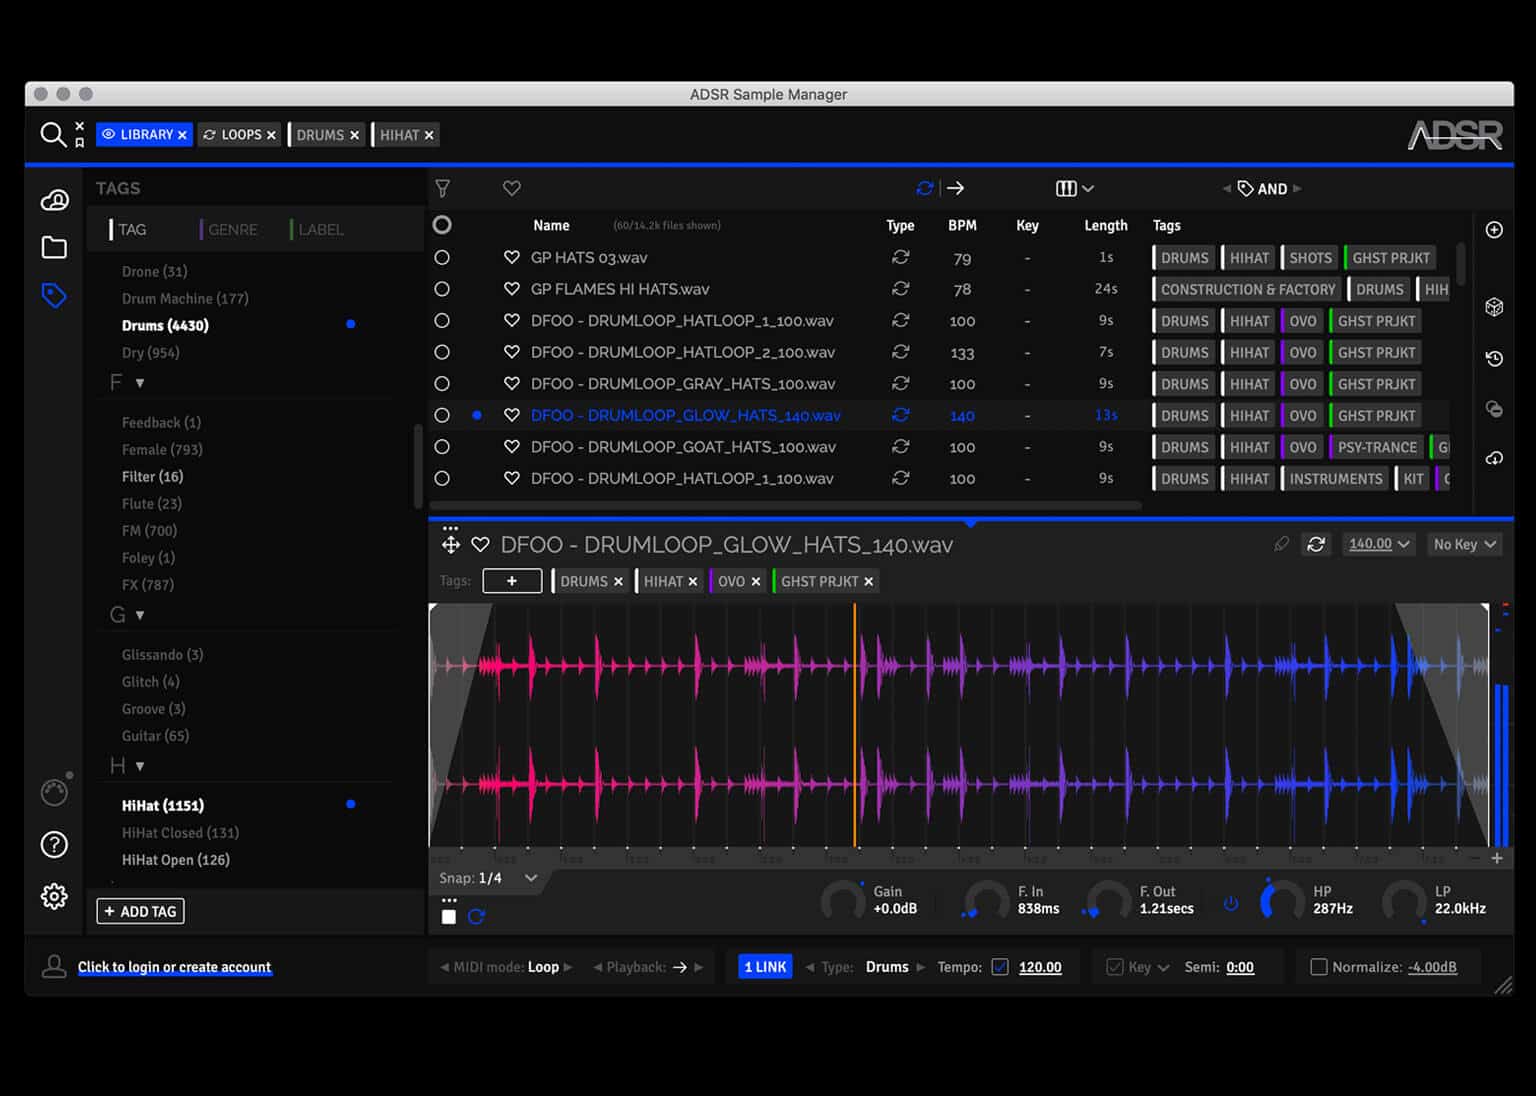 ADSR Sample Manager updated to Version 1.5 1